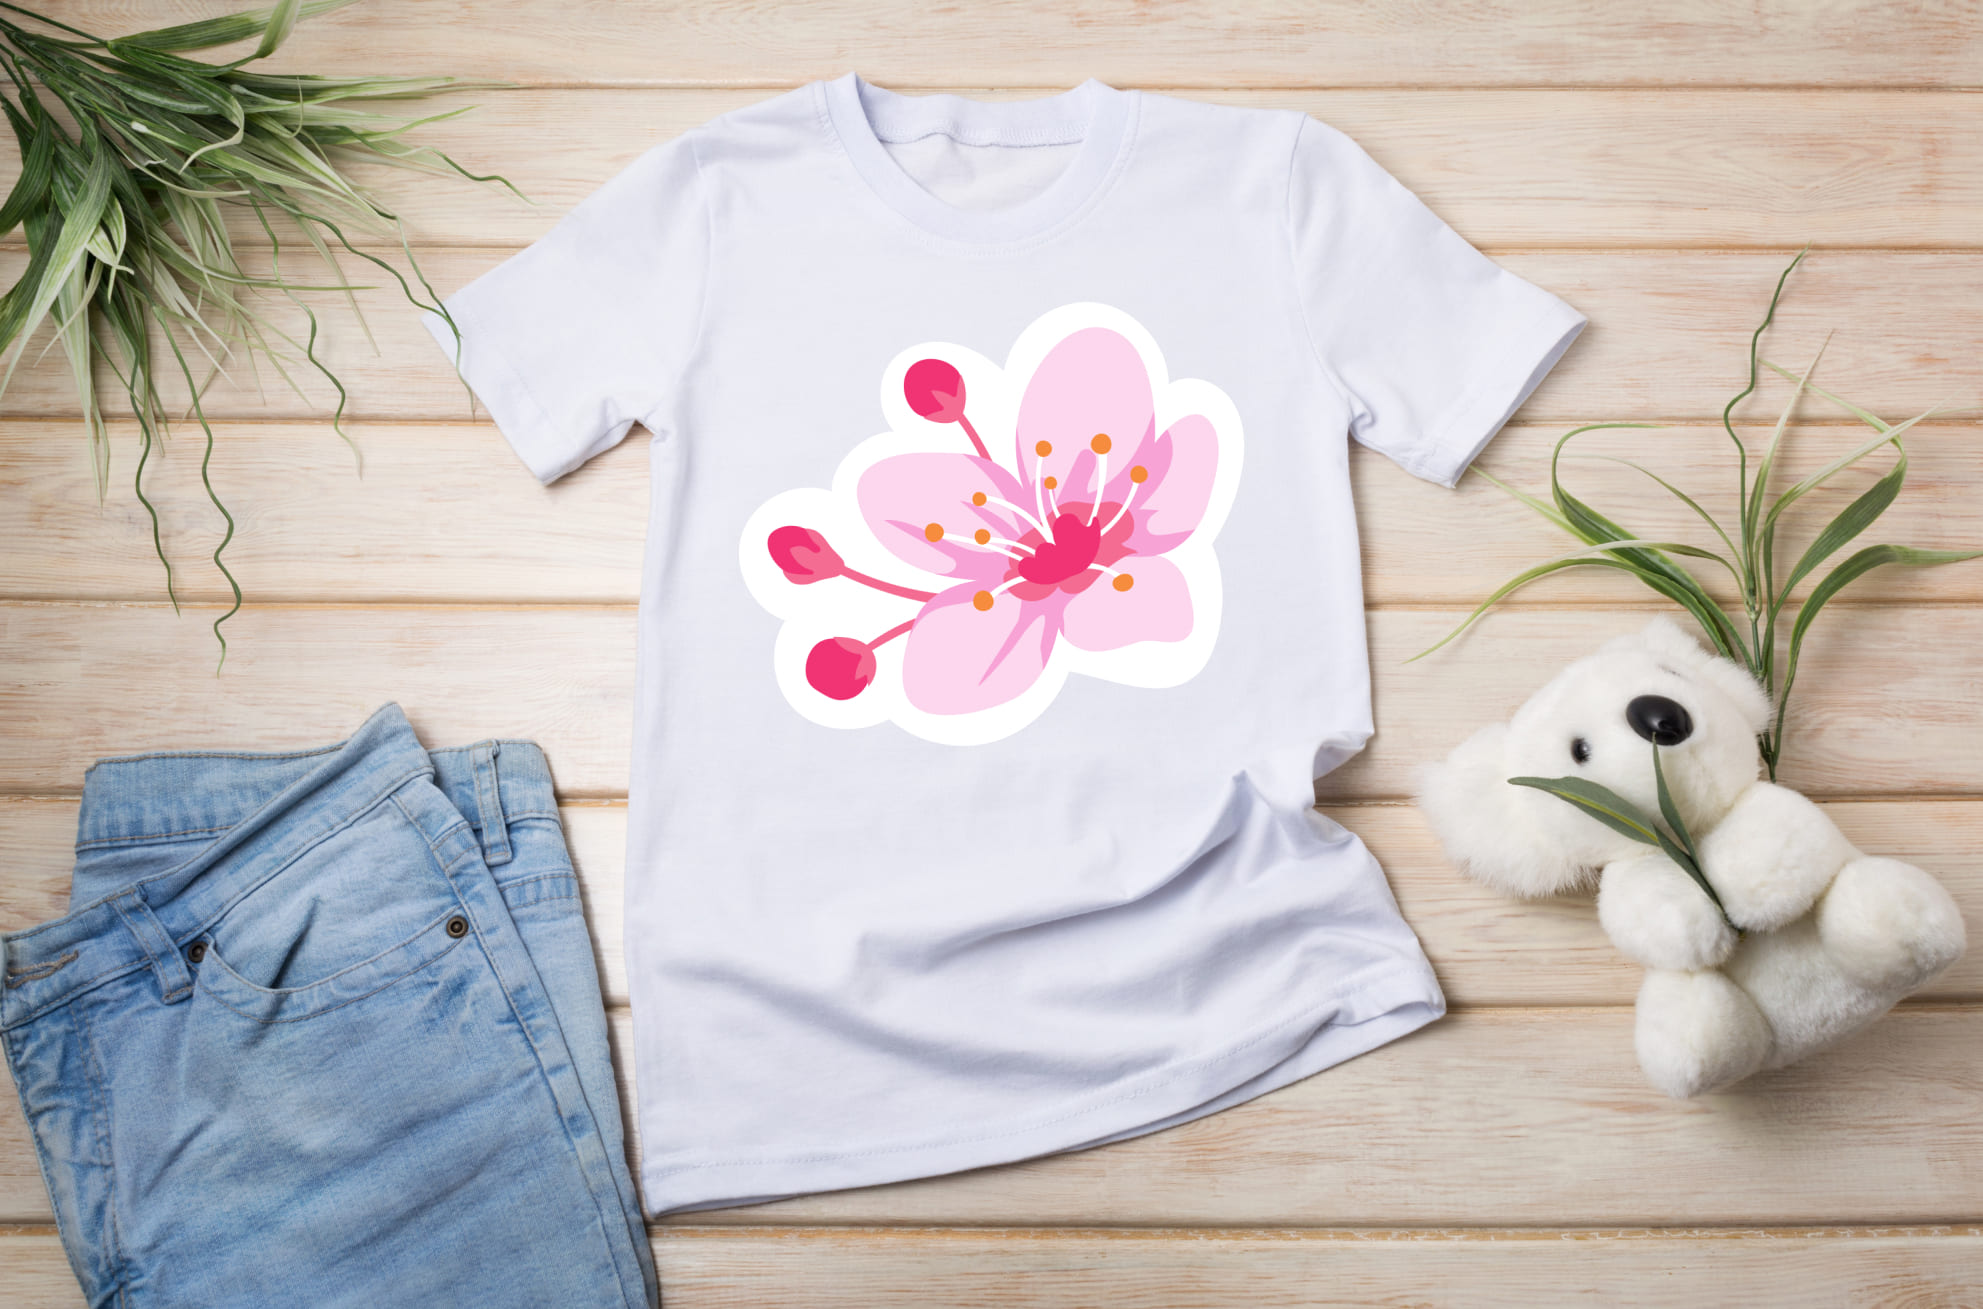 Flowers for T-shirt print.